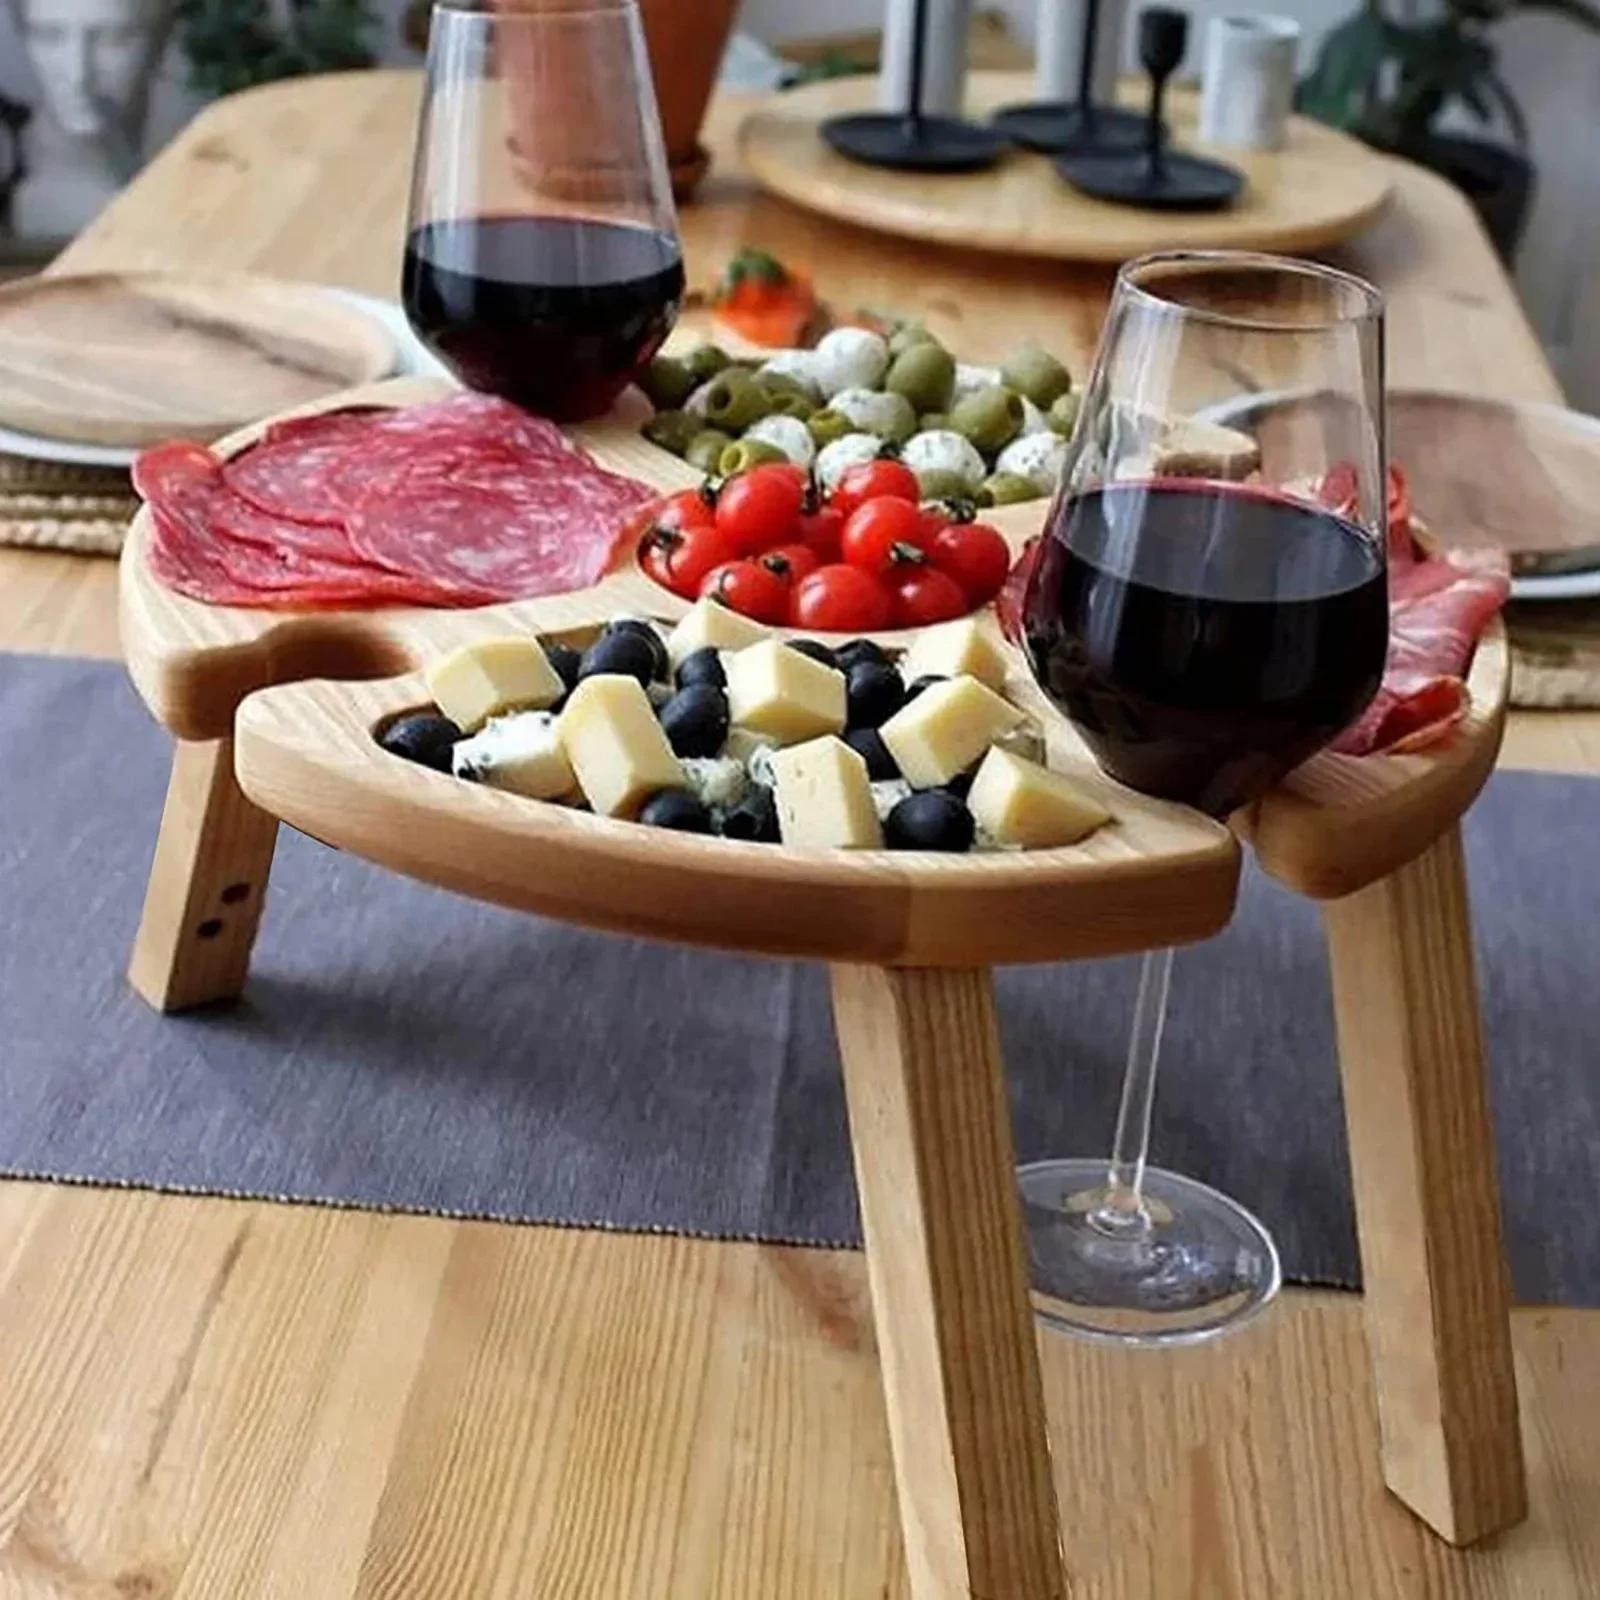 

Outdoor Folding Wooden Picnic Table-With Glass Holder Round Desk Wine Glass Rack Collapsible Table For Garden Party